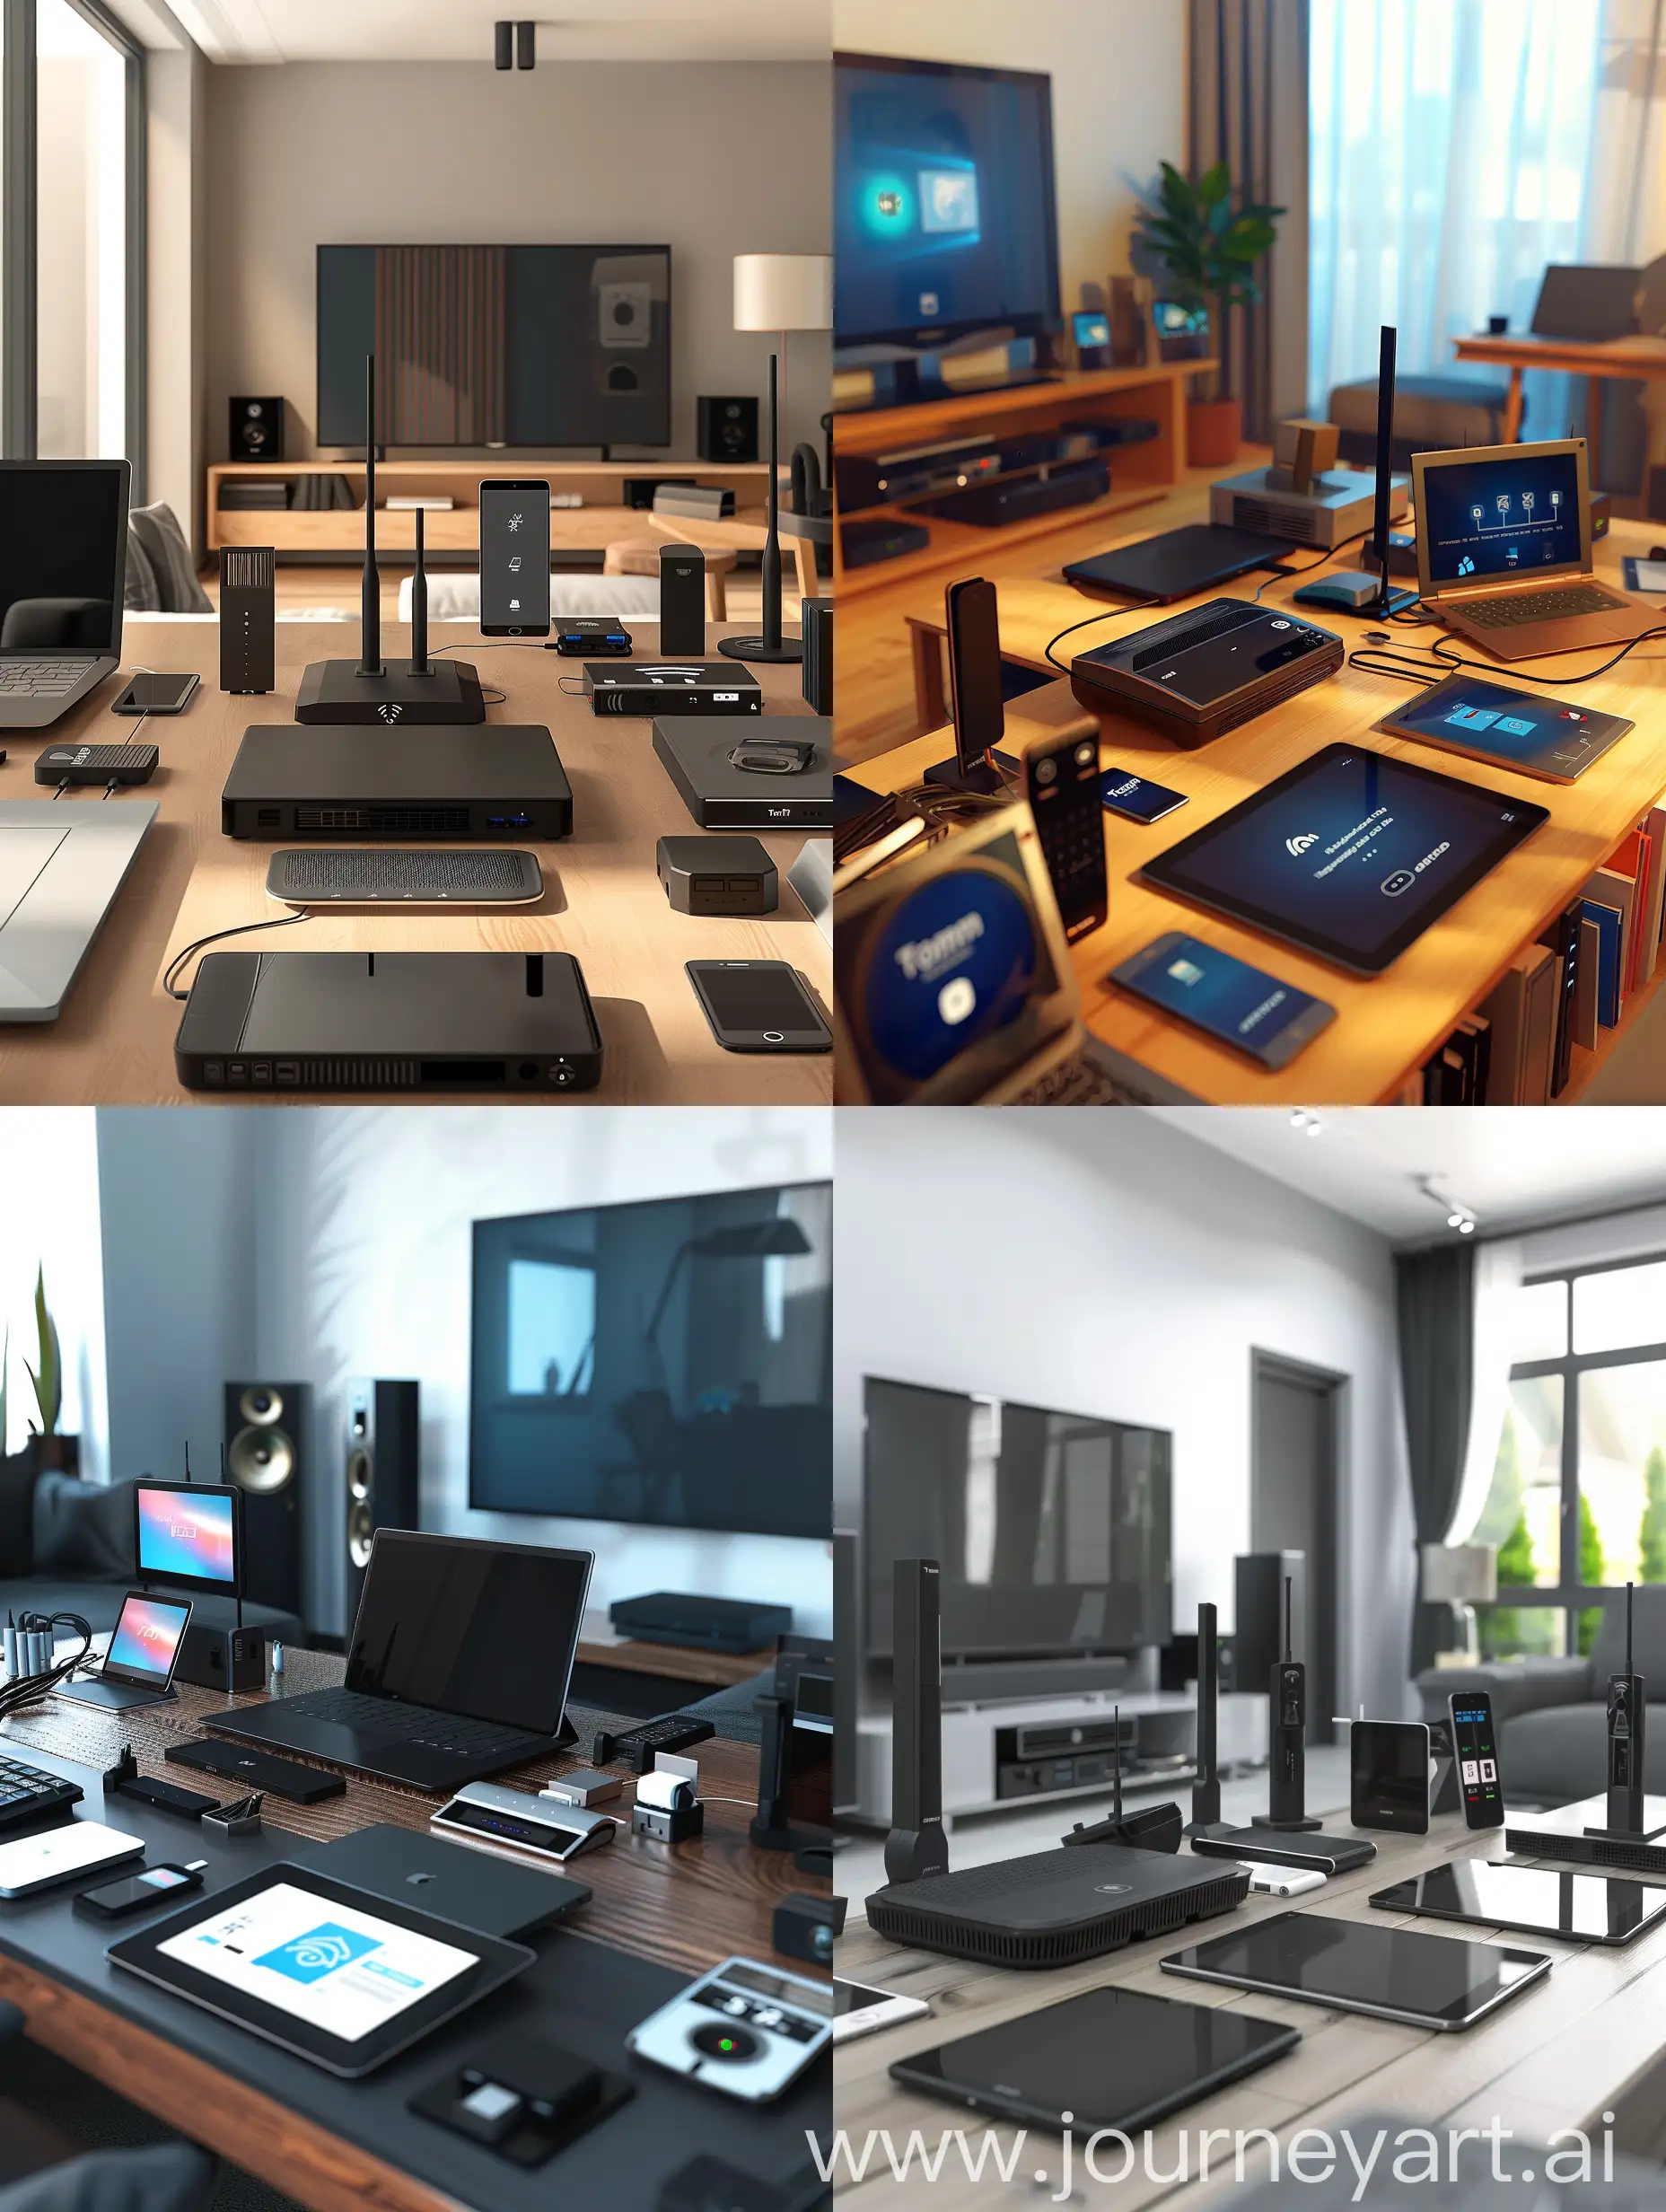 Hi! I need an image of a high quality living room, full of telekom equipment. Please make sure that it contains the following elements: - Router - Tablet - Notebook - Phone - Smart Home Devices like camera - TV - Settop Box for TV The picture shall be photo realistic.